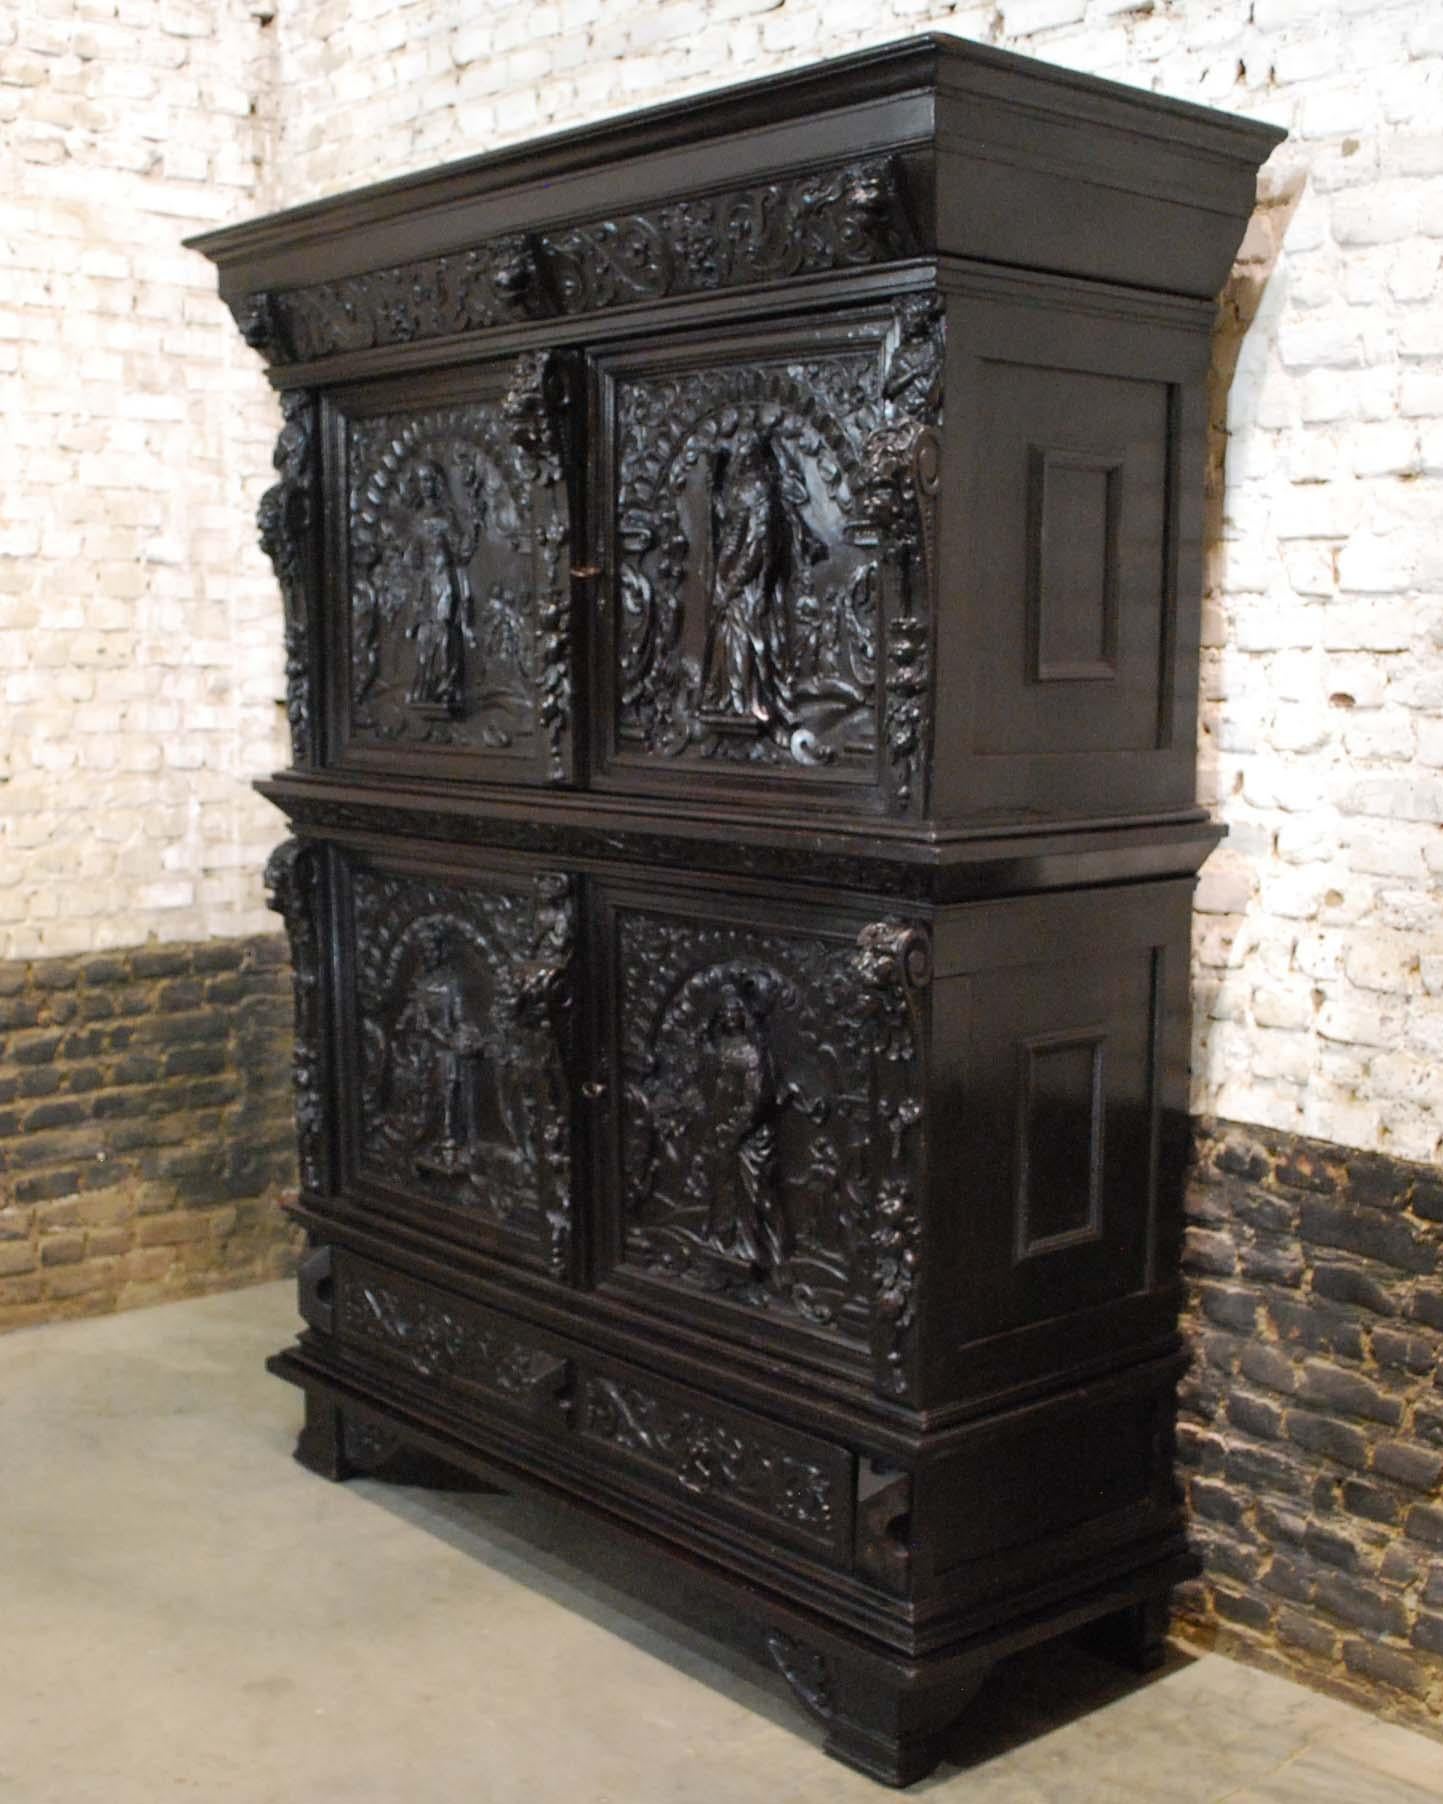 An elaborate and rare Renaissance four-door cabinet that is typical for the second half of the 17th century.
It is heavily decorated with Renaissance ornaments and symbols. This cabinet is made in the southern part of the Netherlands, circa